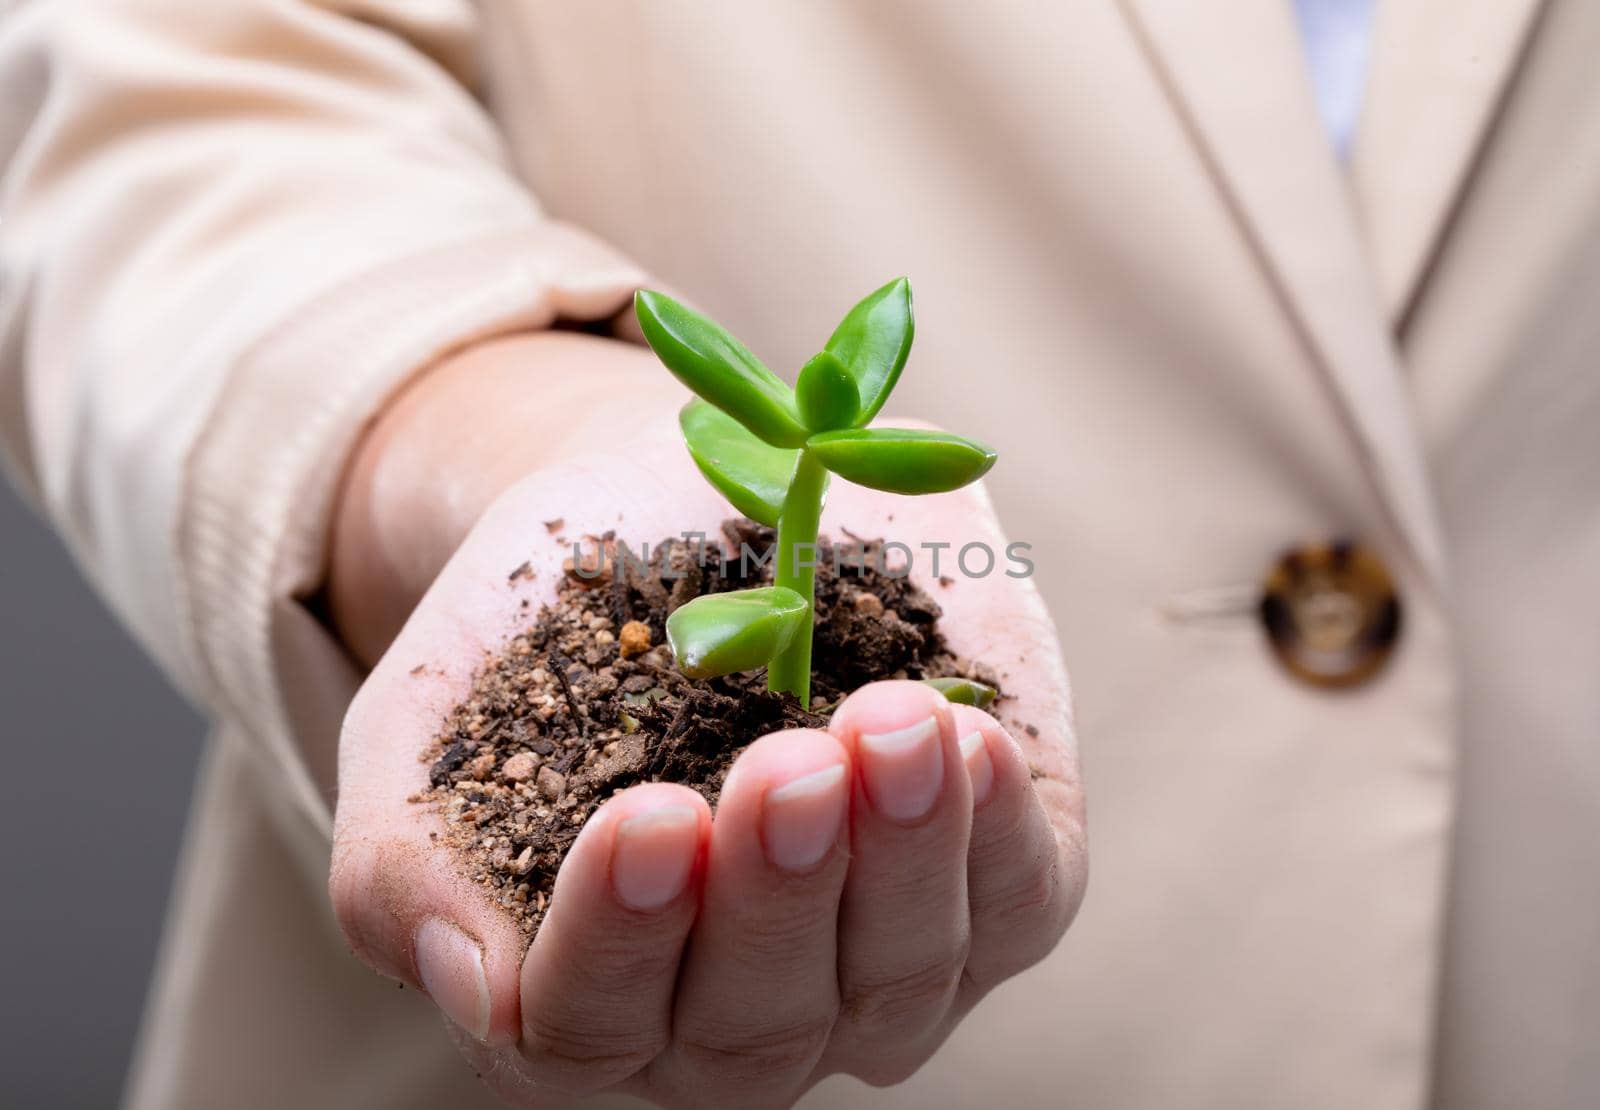 Midsection of caucasian businesswoman holding plant seedling, isolated on grey background by Wavebreakmedia